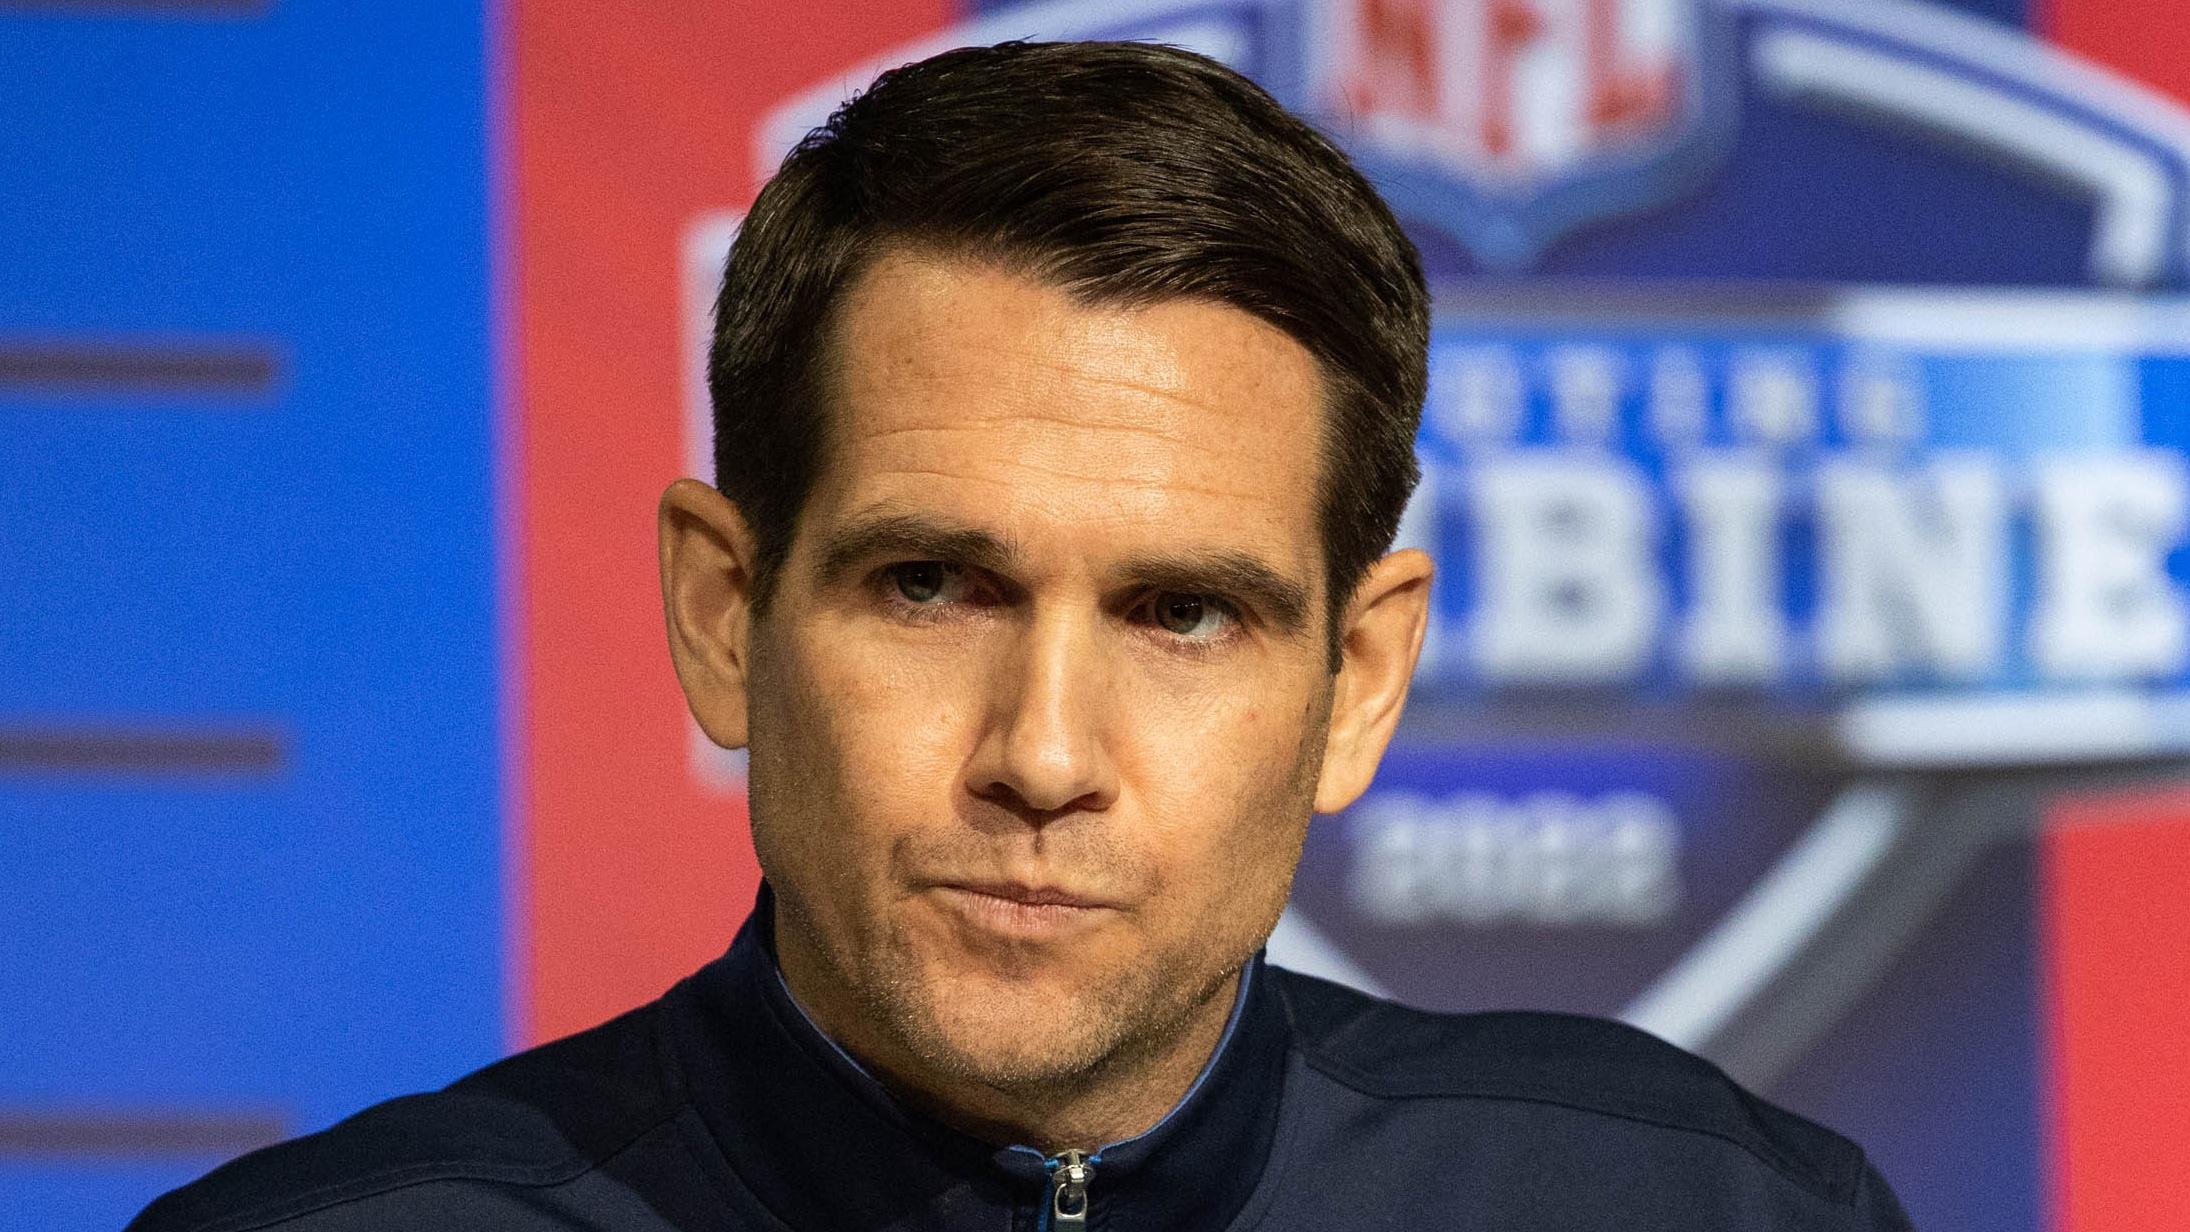 Mar 1, 2022; Indianapolis, IN, USA; New York giants general manager Joe Schoen talks to the media during the 2022 NFL Combine. Mandatory Credit: Trevor Ruszkowski-USA TODAY Sports / © Trevor Ruszkowski-USA TODAY Sports